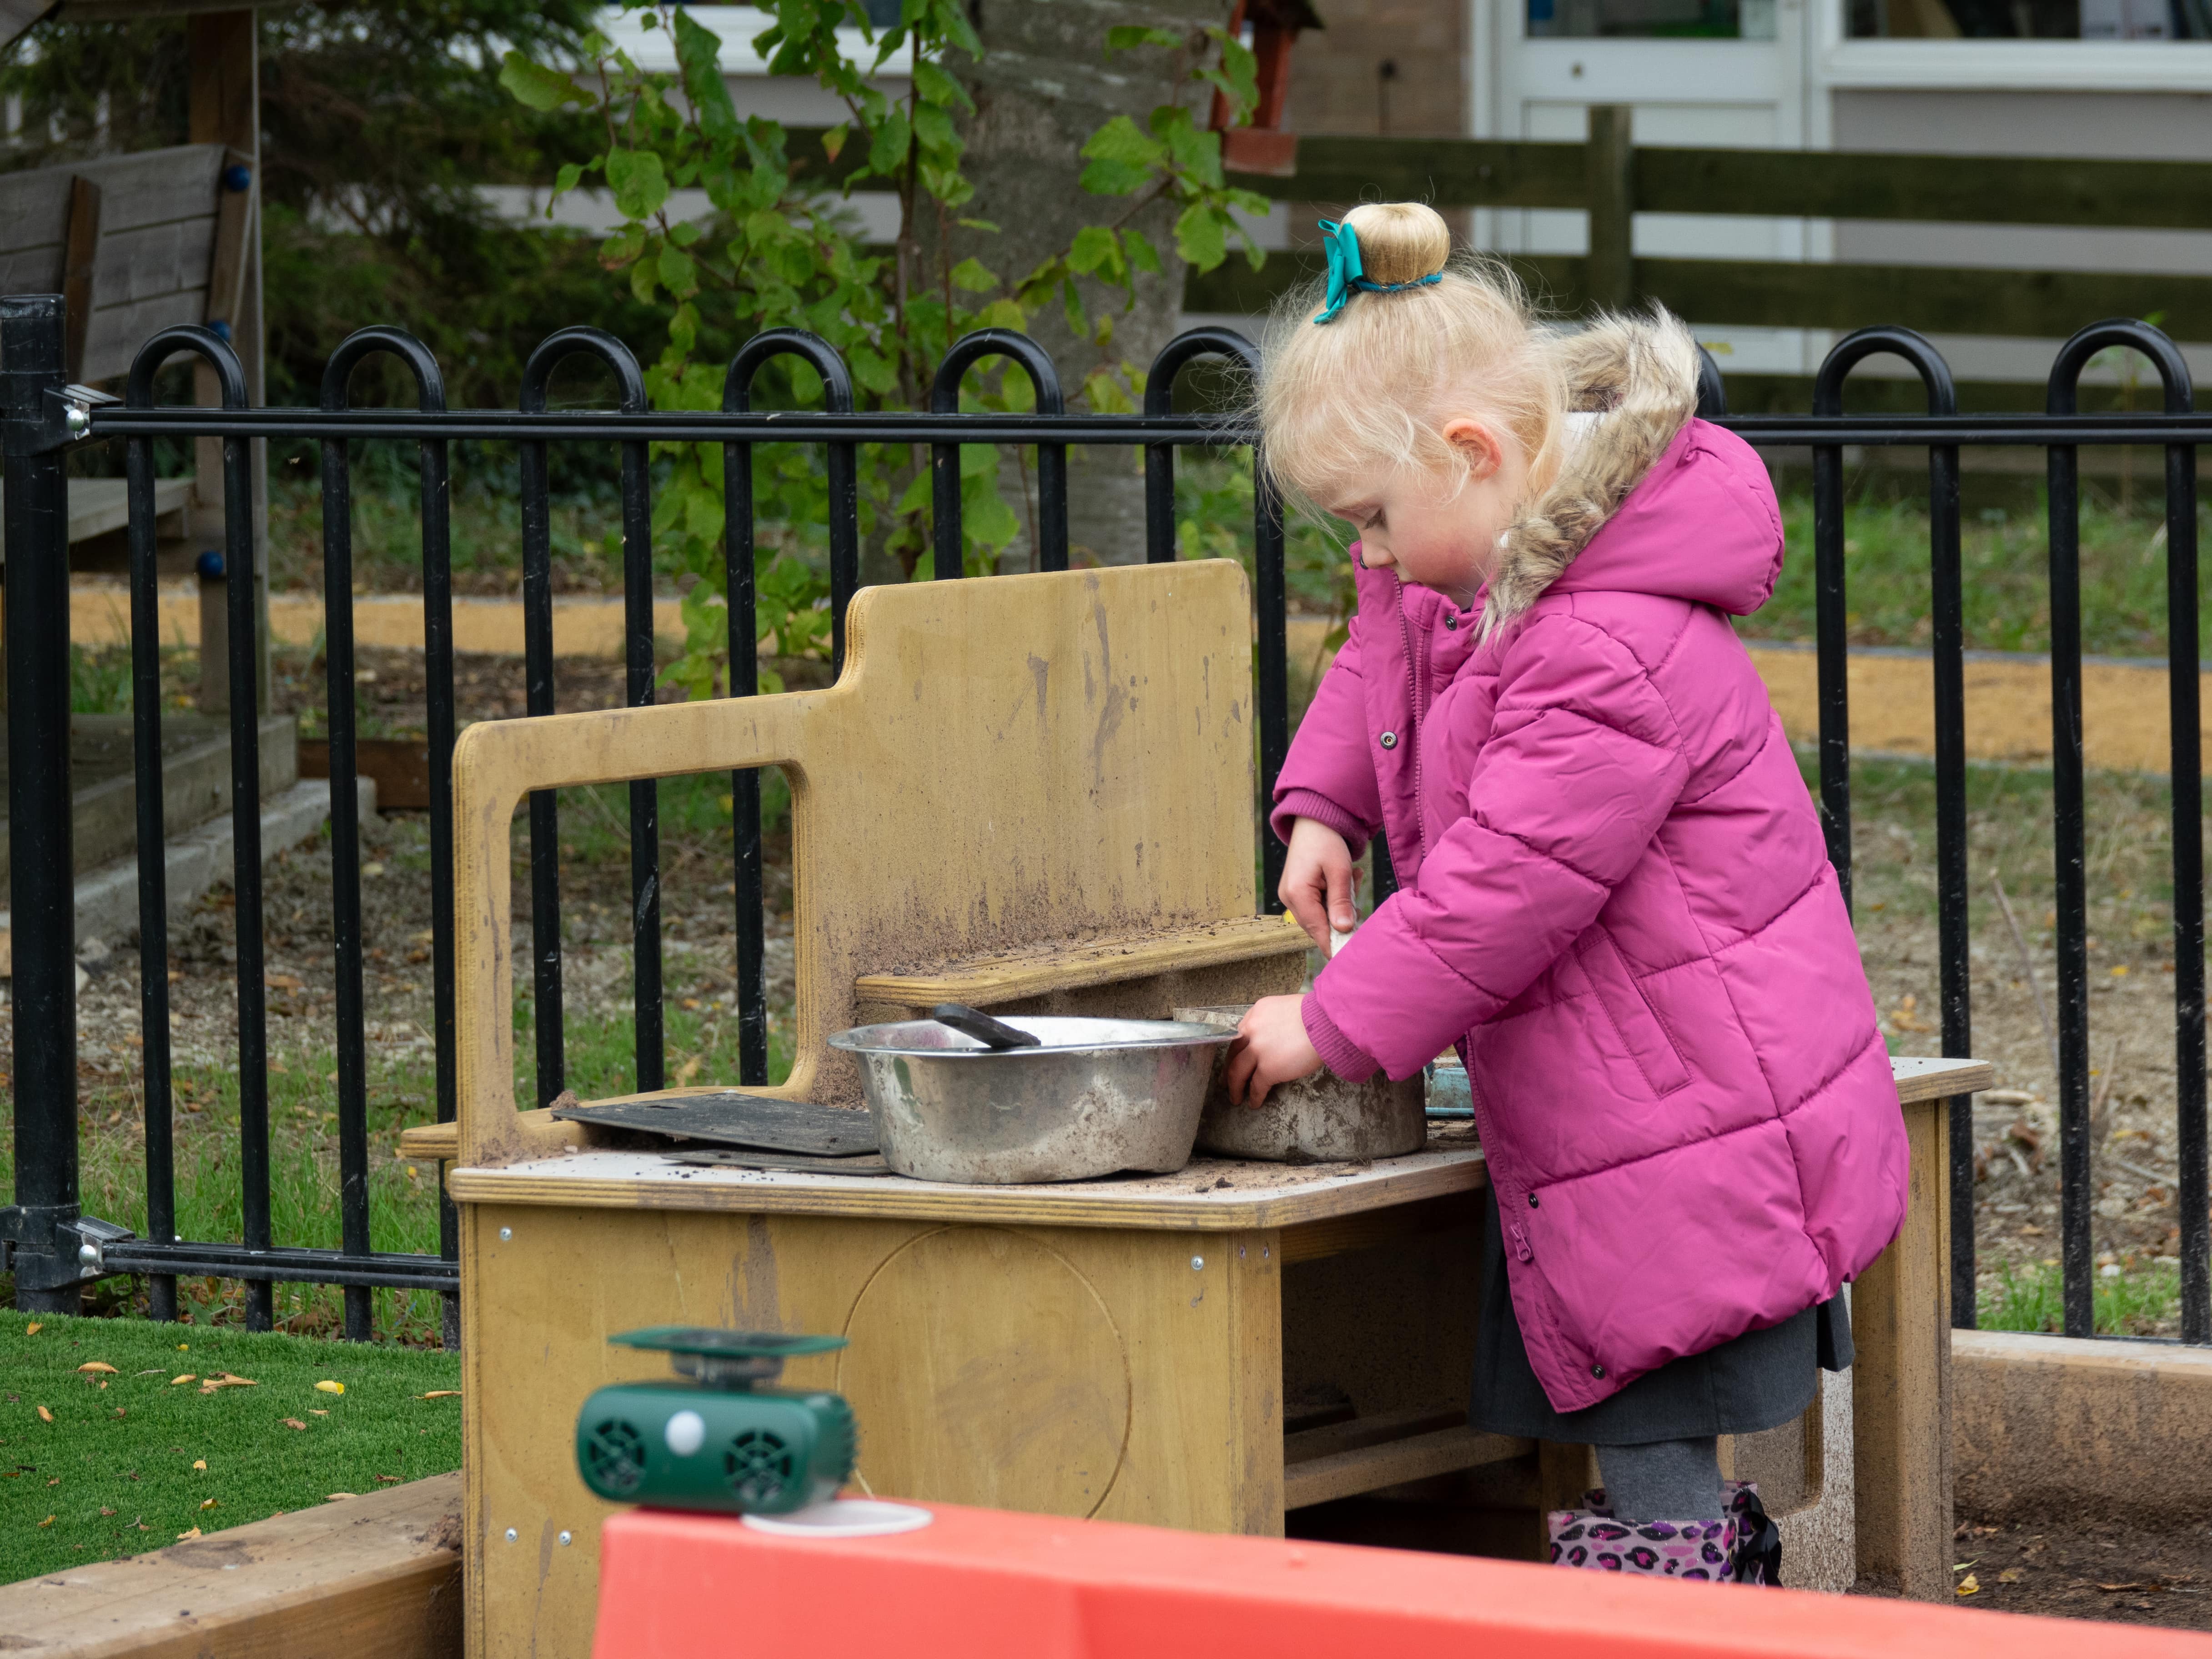 A little girl wearing a pink coat is playing with the mud kitchen equipment, made by Pentagon Play. She is pouring mud into a pan and stirring it.